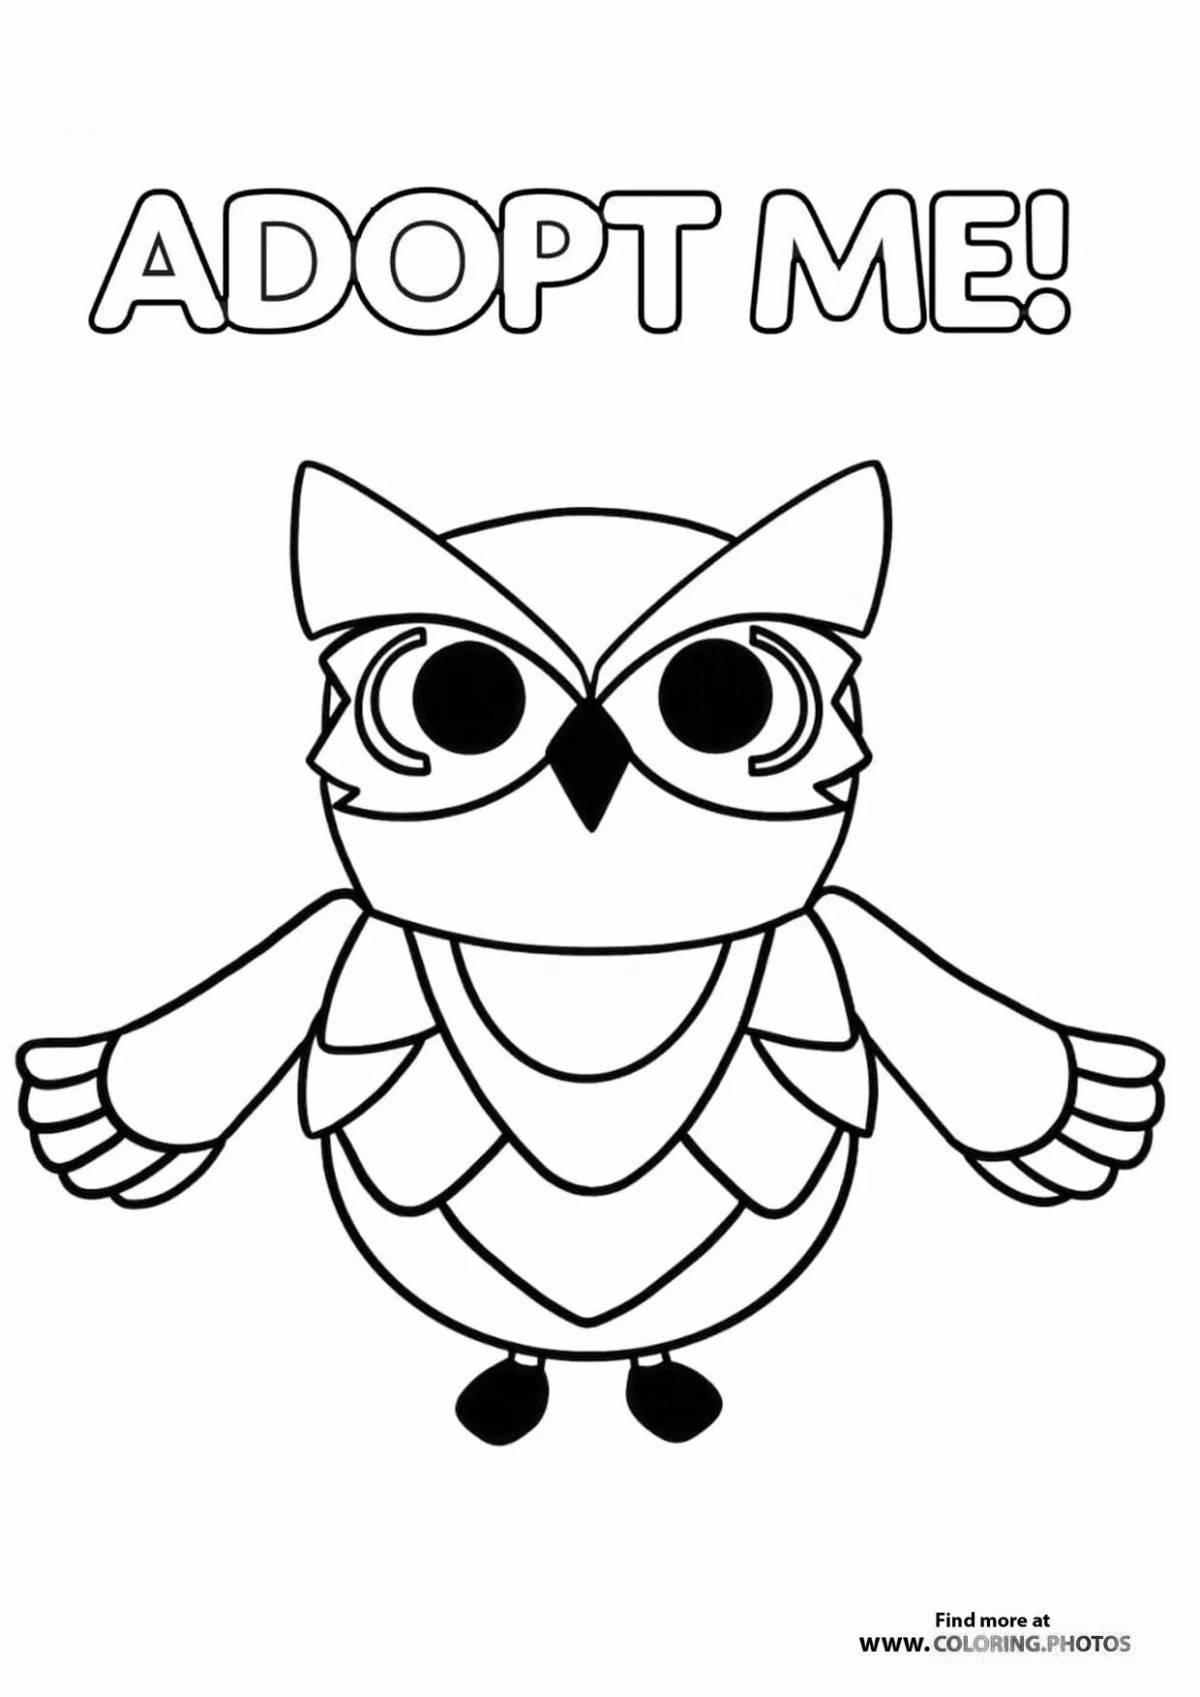 Animated roblox animal coloring page